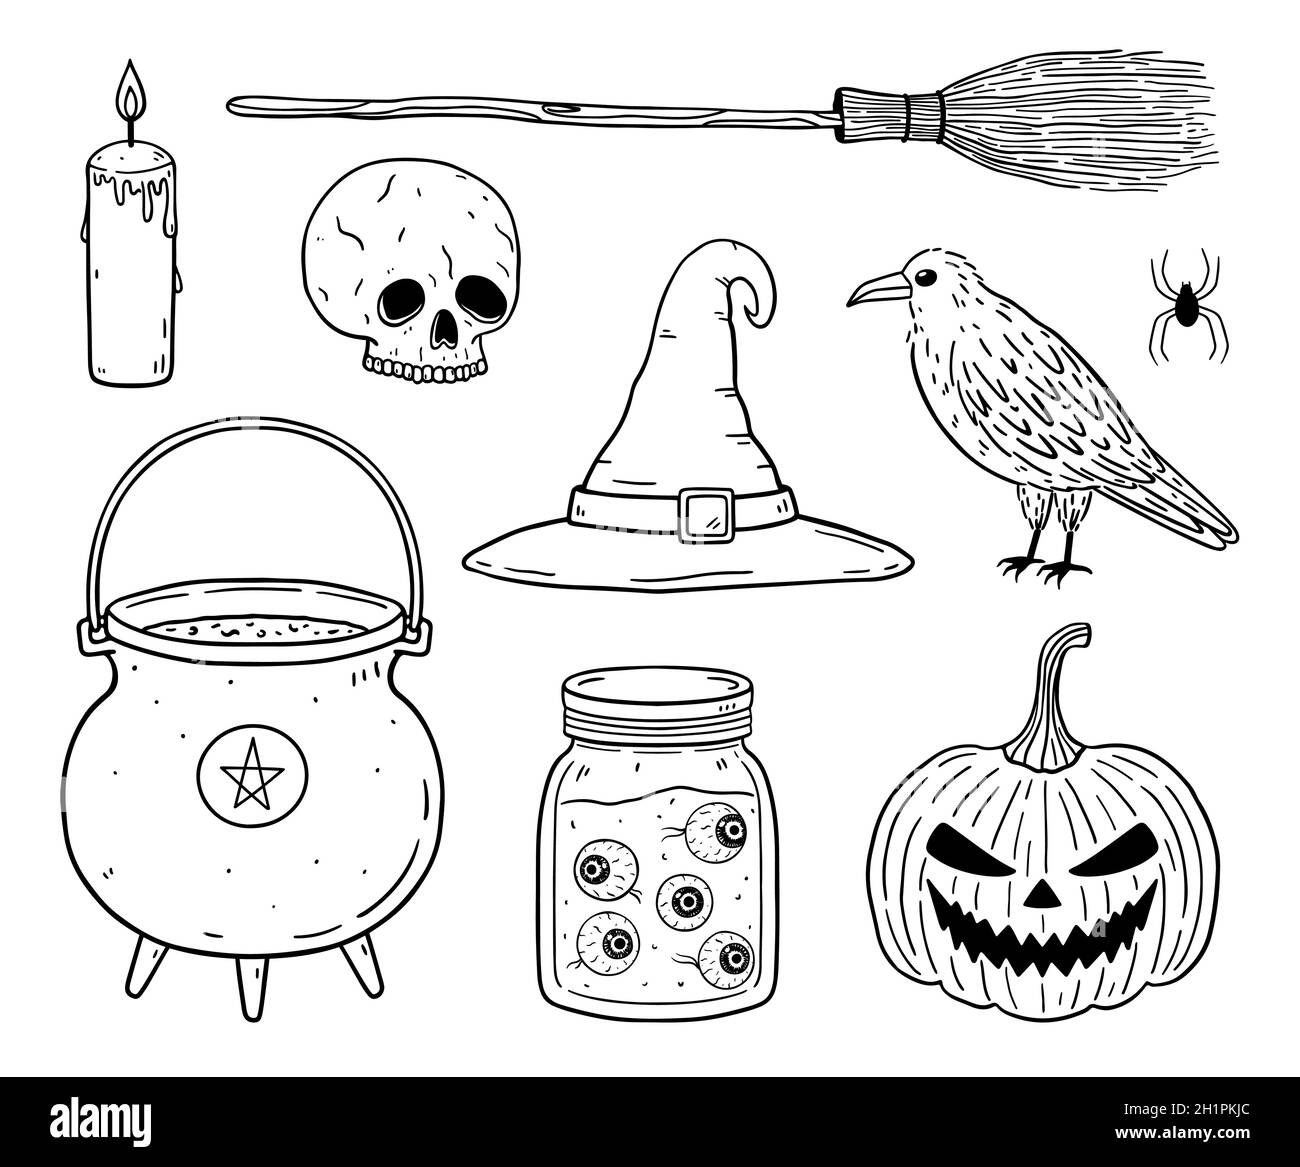 Doodle set of Halloween elements - skull, raven, witch's cauldron, broom and hat, creepy pumpkin lantern, jar with eyeballs. Vector hand-drawn illustration. Perfect for holiday designs, decorations. Stock Vector